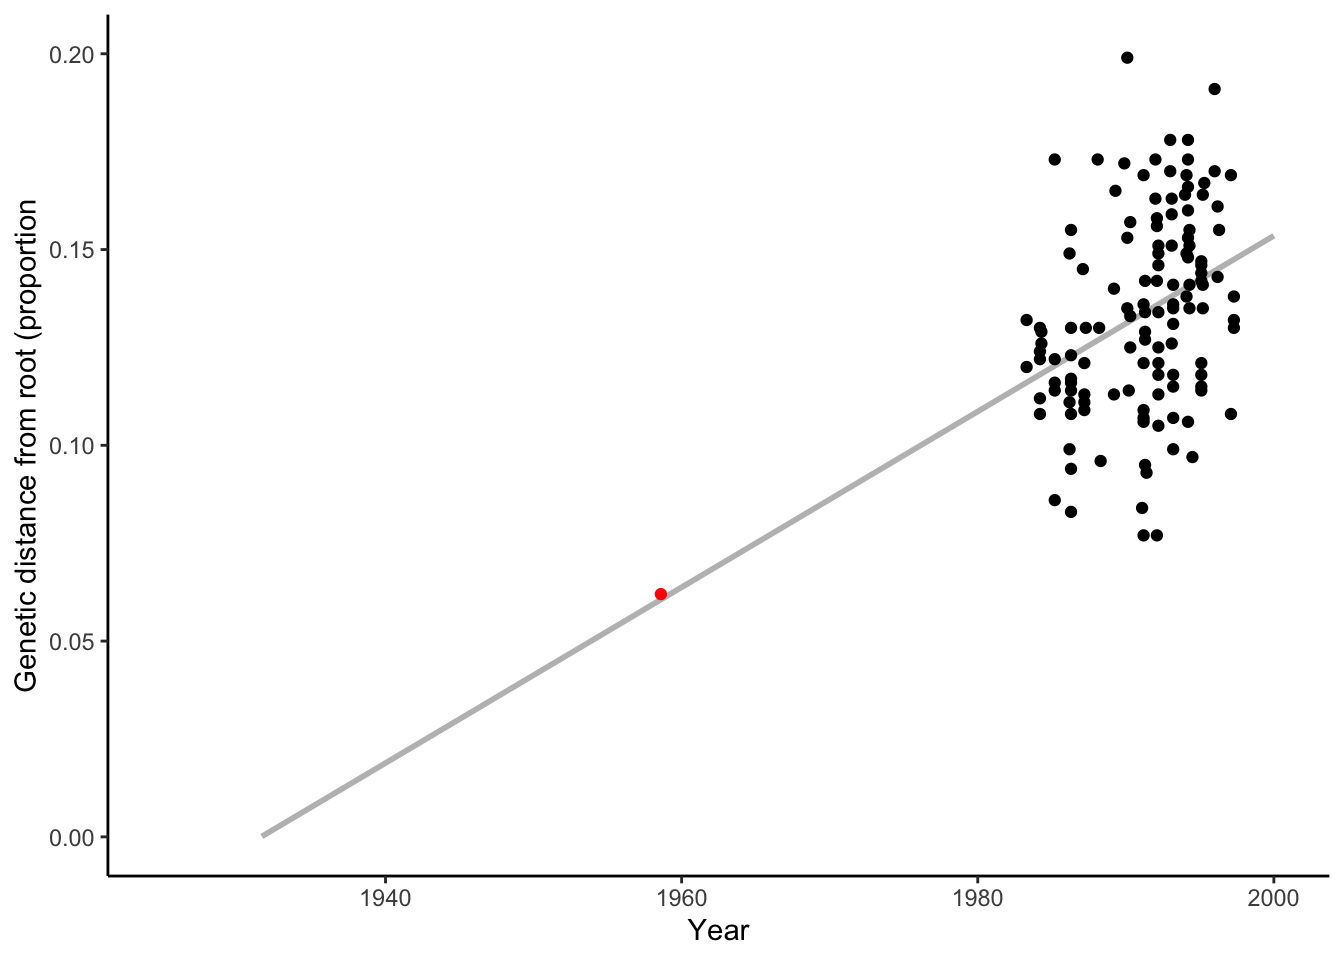 The application of a molecular clock used to date the orgin of HIV-1 group M (the principal pandemic group). Based on DNA sequence variation in isolates collected between 1983 and 1997, the shared common ancestor of HIV likely existed in the 1930s. The red dot represents the earliest known HIV sample, which corroborates the molecular clock estimate. [Data](data/7_hiv.csv) from Korber et al. (2000).